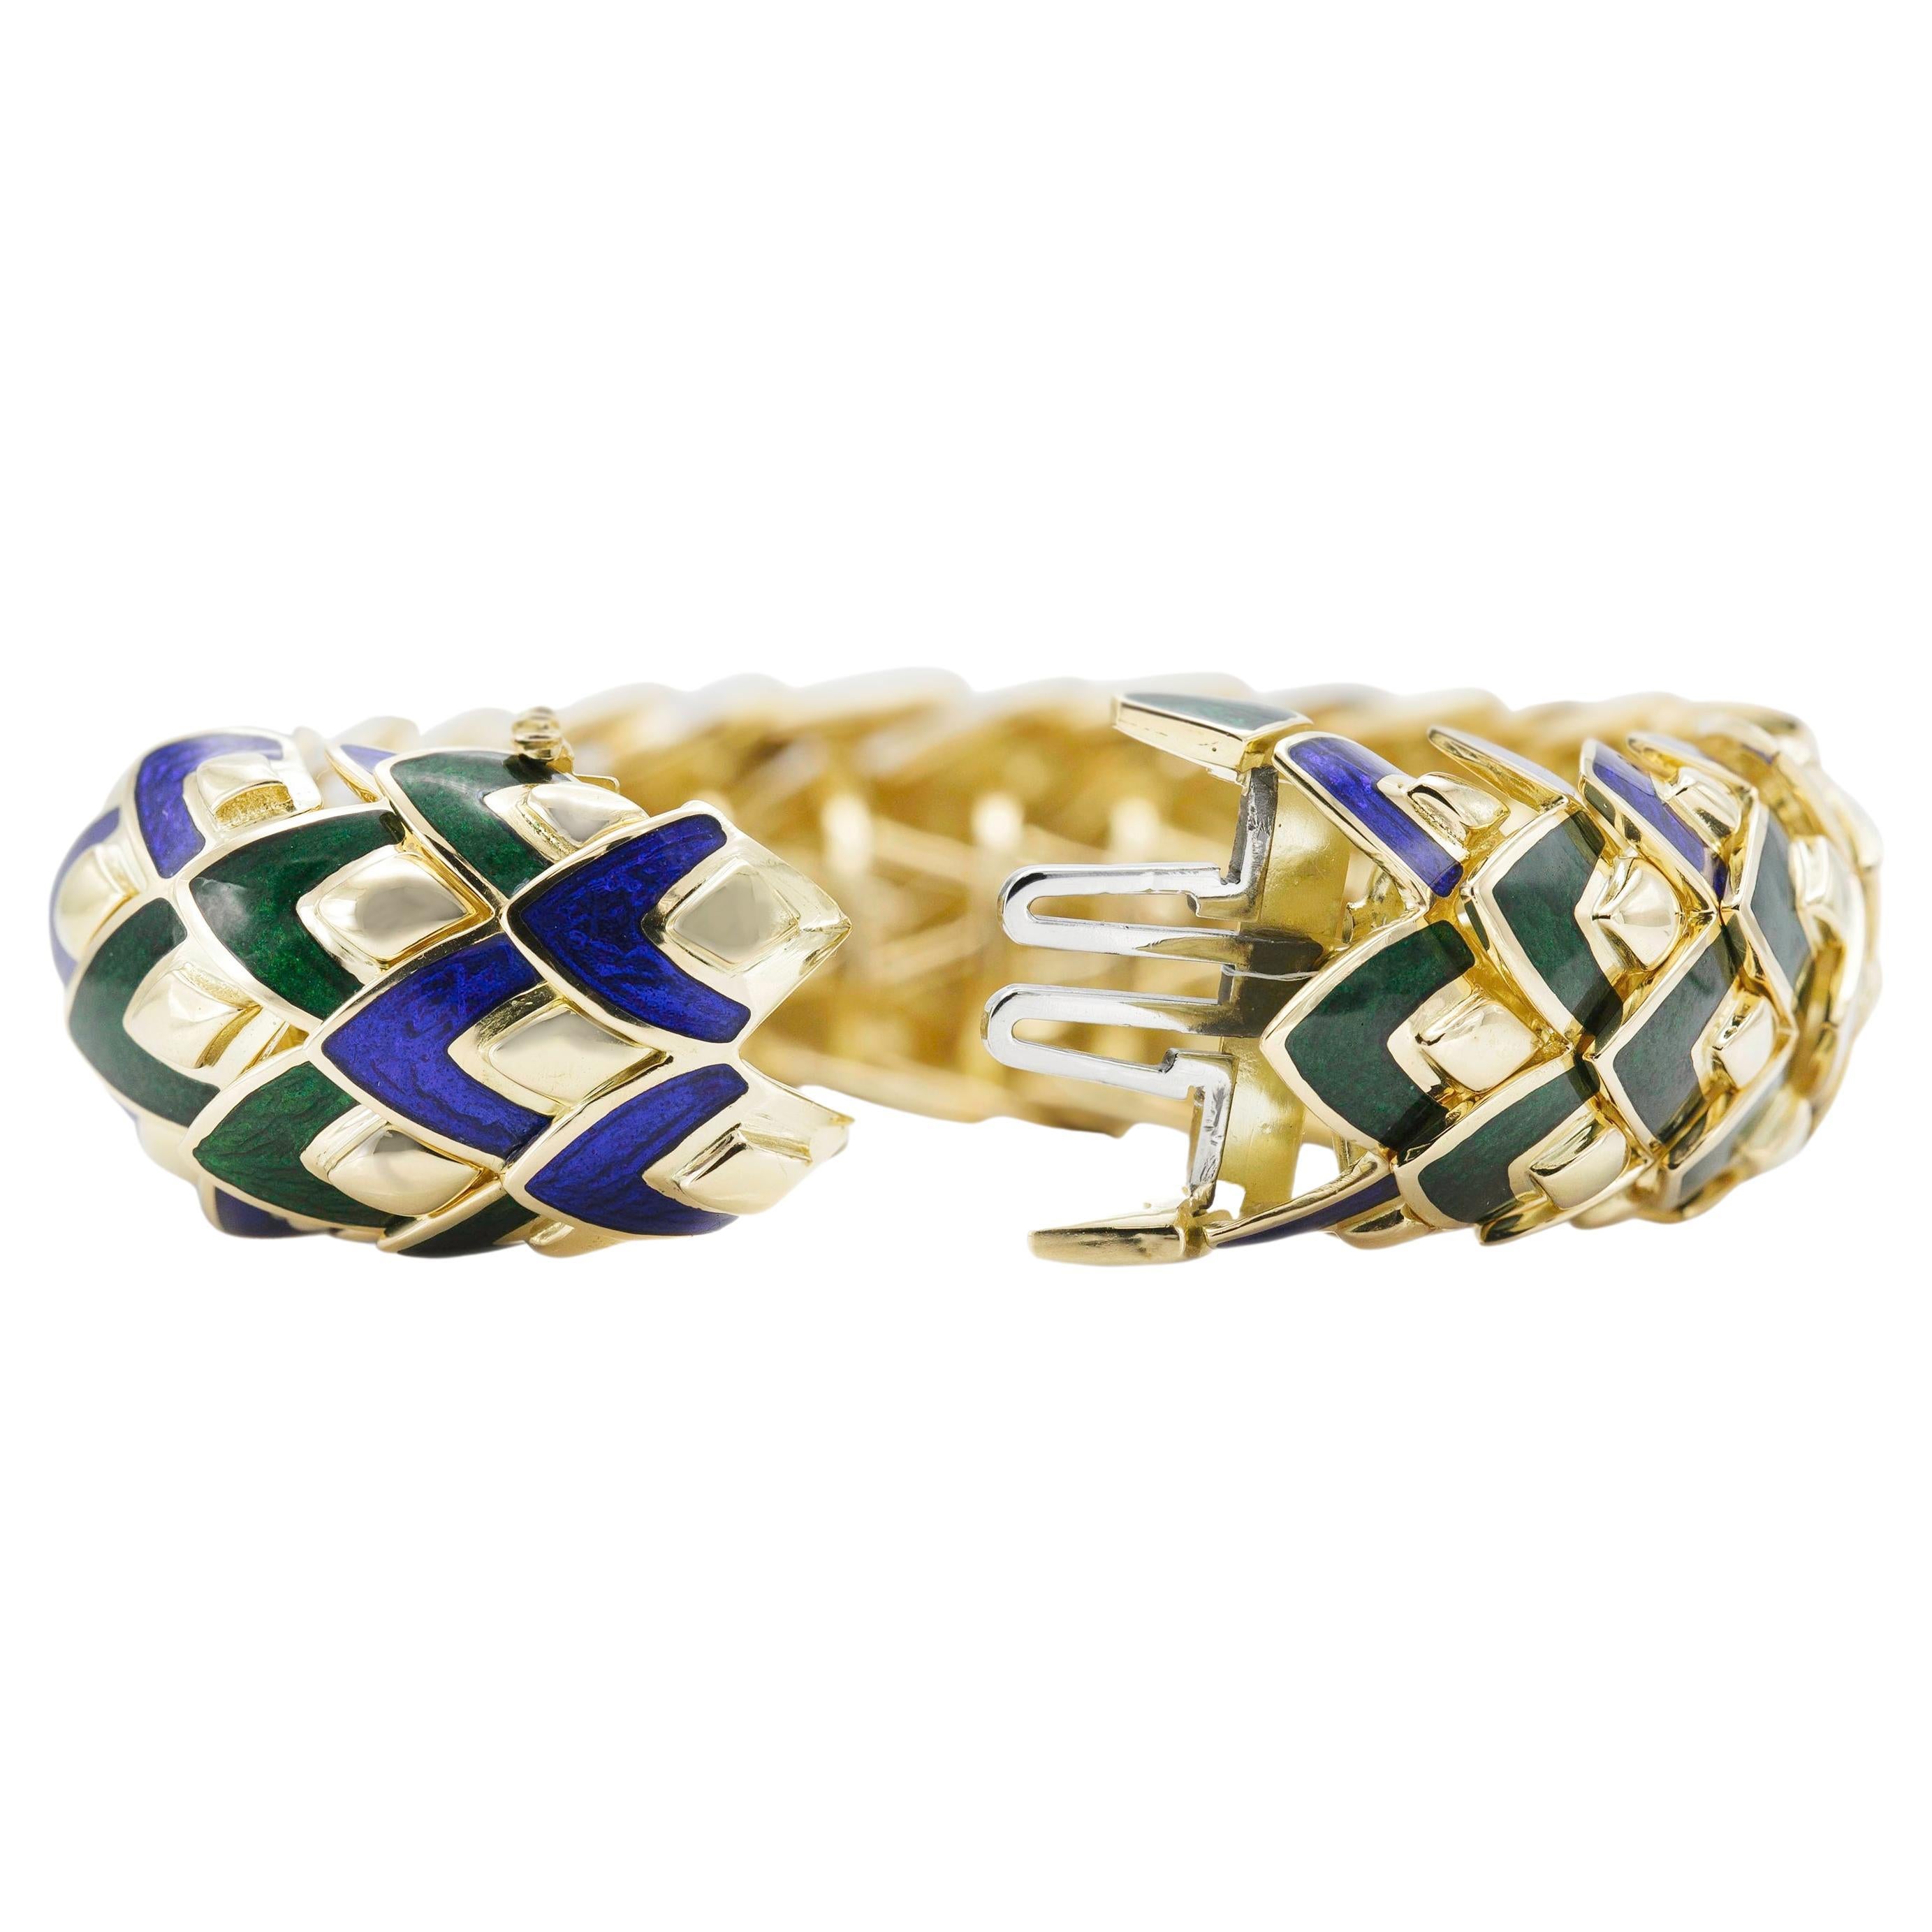 Finely crafted in 18K yellow gold featuring blue and green enamel on the scale-like links. 
Size 6 1/2 inches.
Signed by David Webb. 
Matching pin is also available.